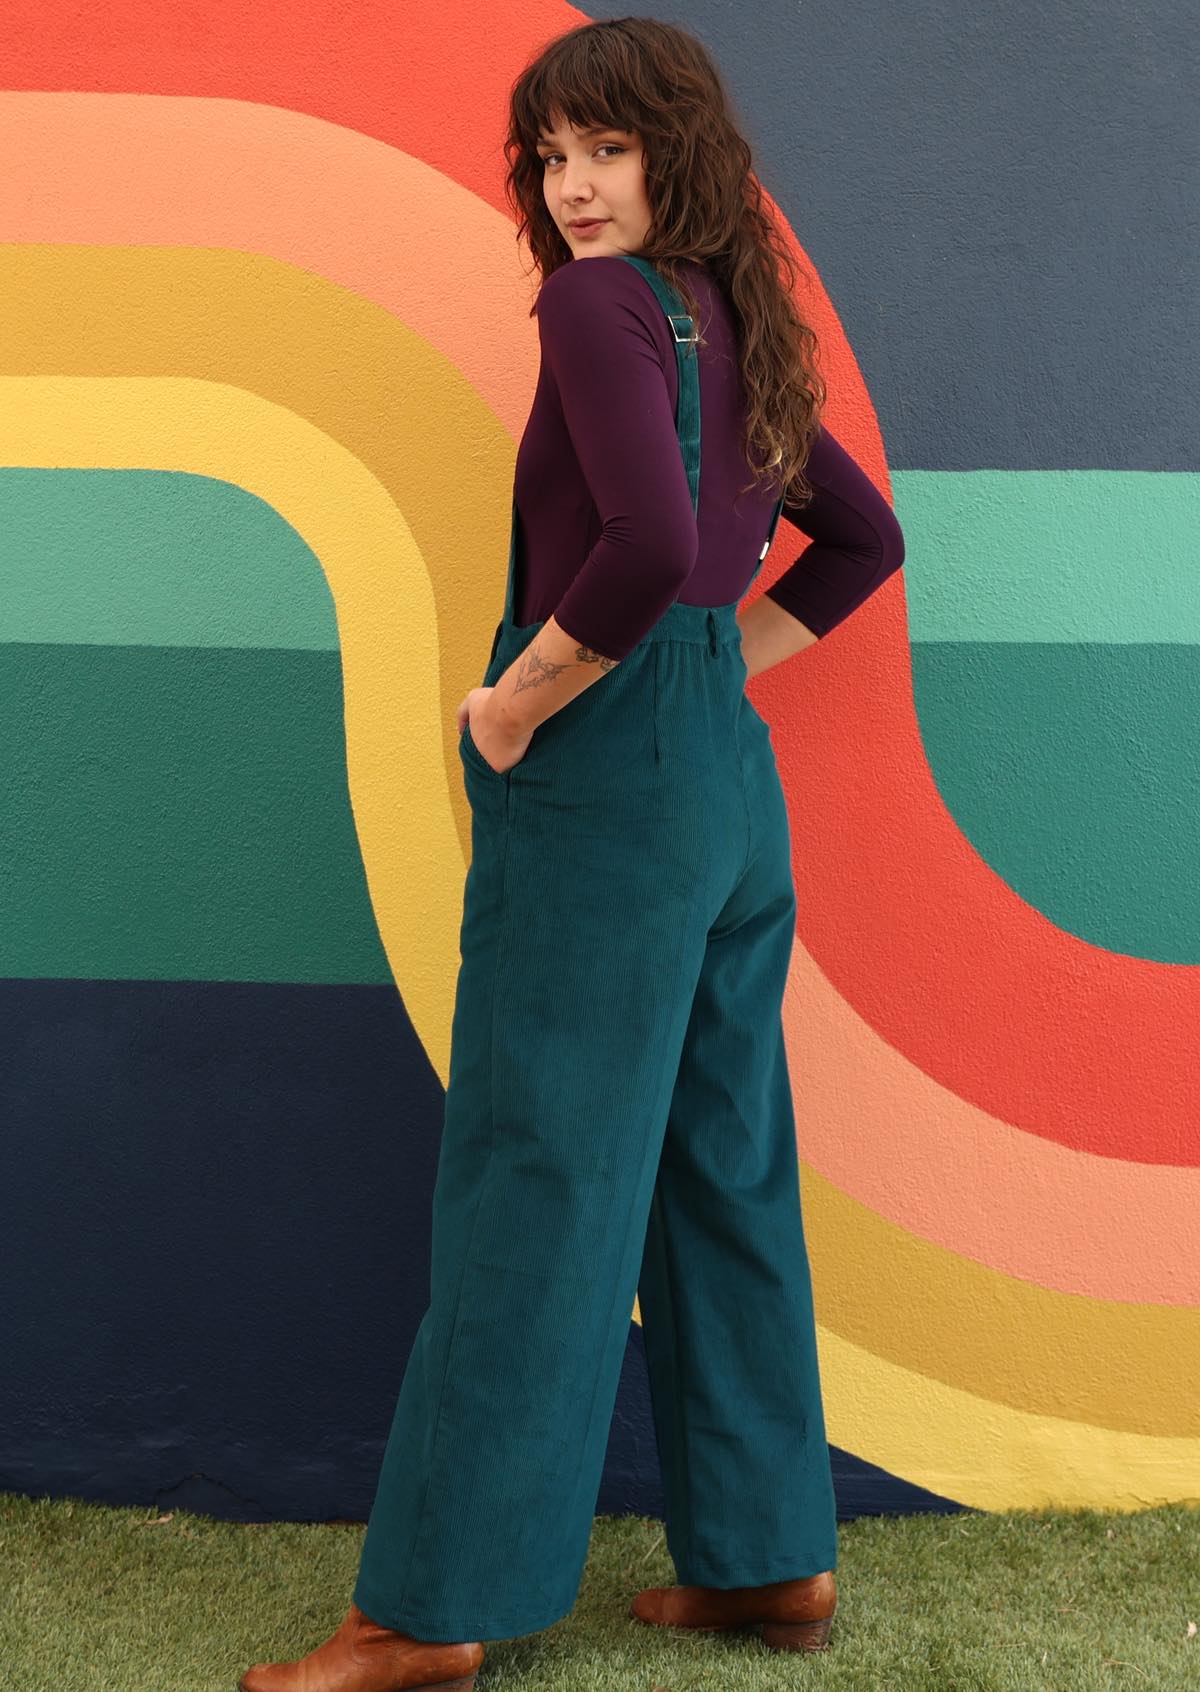 woman wearing dark teal cotton corduroy overalls over long sleeve purple top in front of bright mural side view